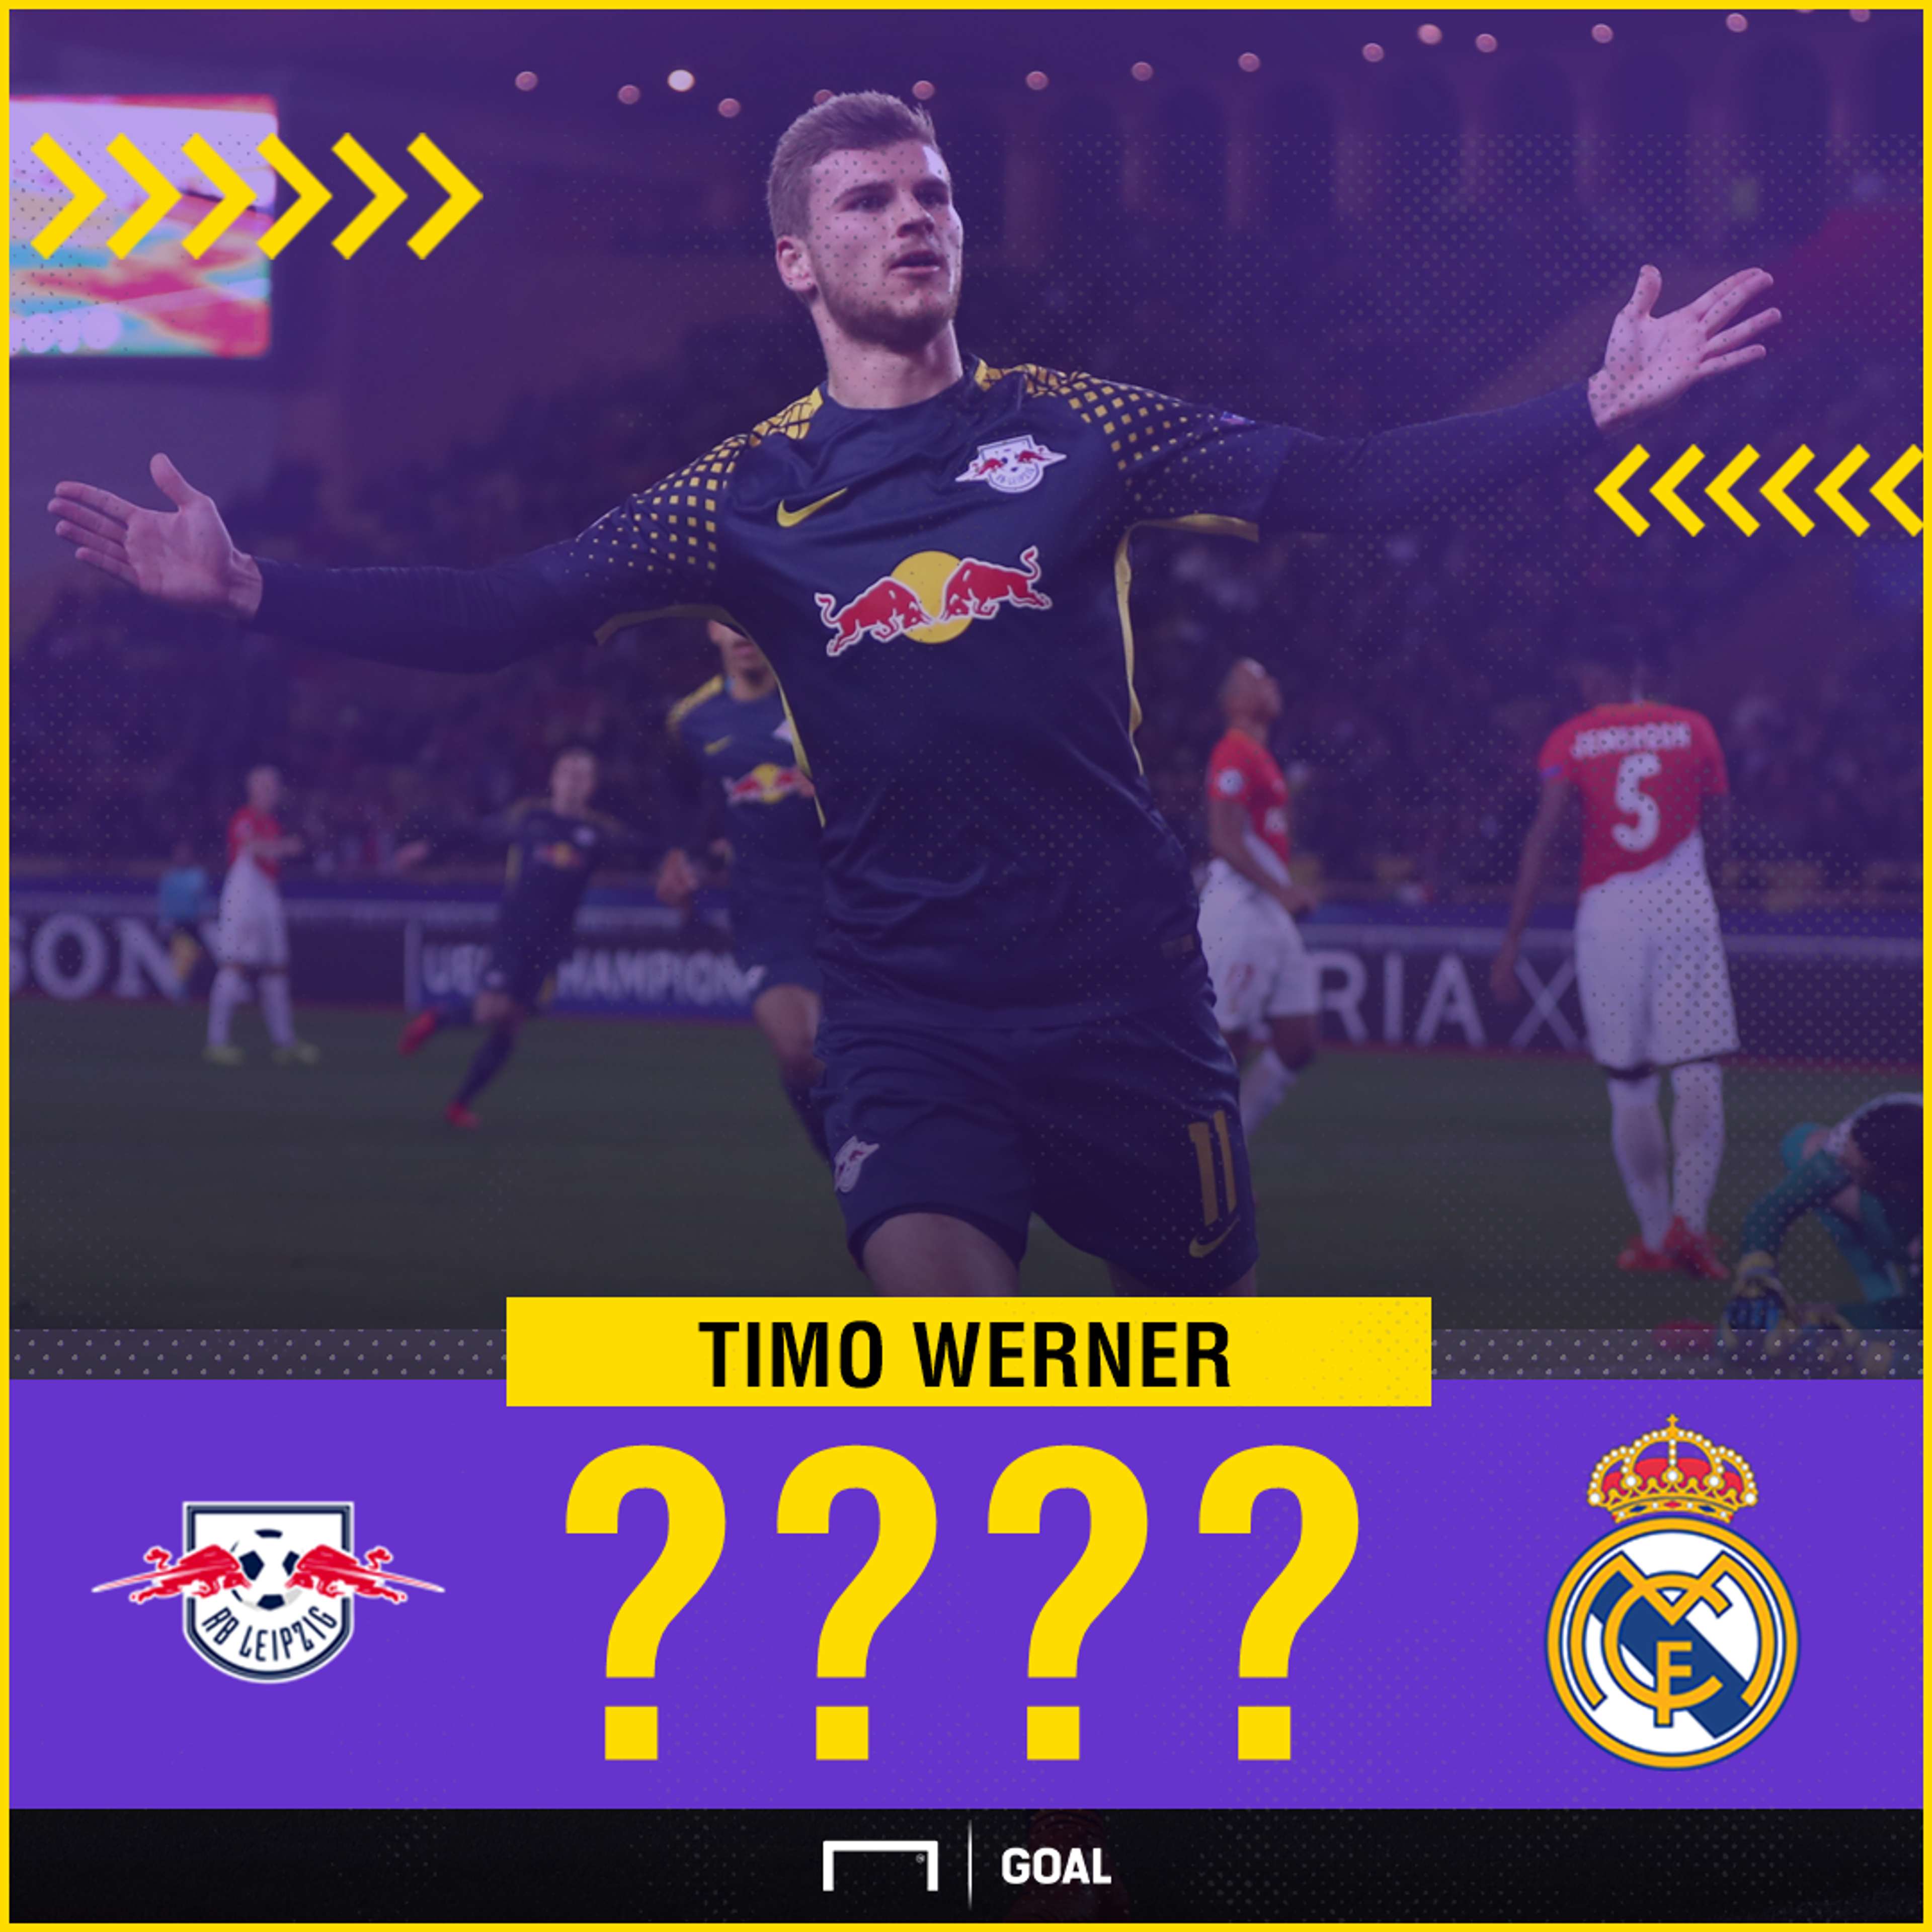 Timo Werner to Real Madrid